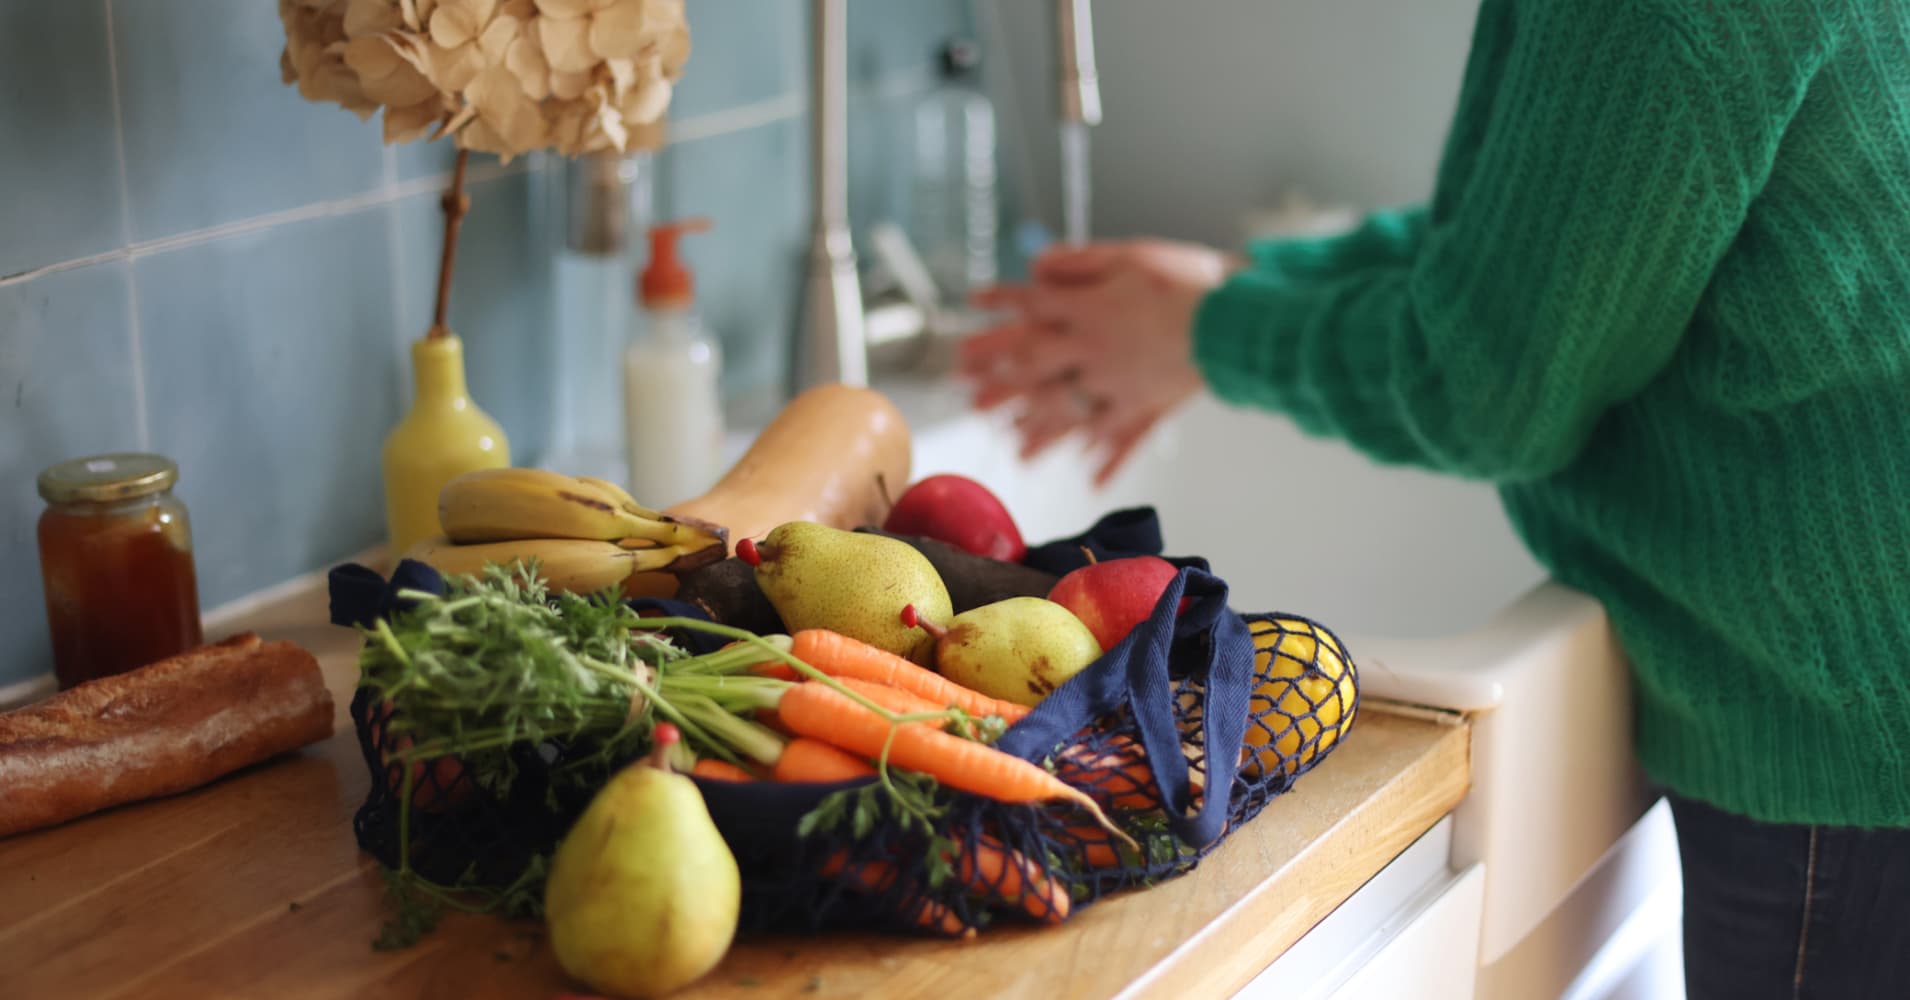 use these 3 simple steps to wash fruits and vegetables so they're safe to eat, says registered dietitian nutritionist